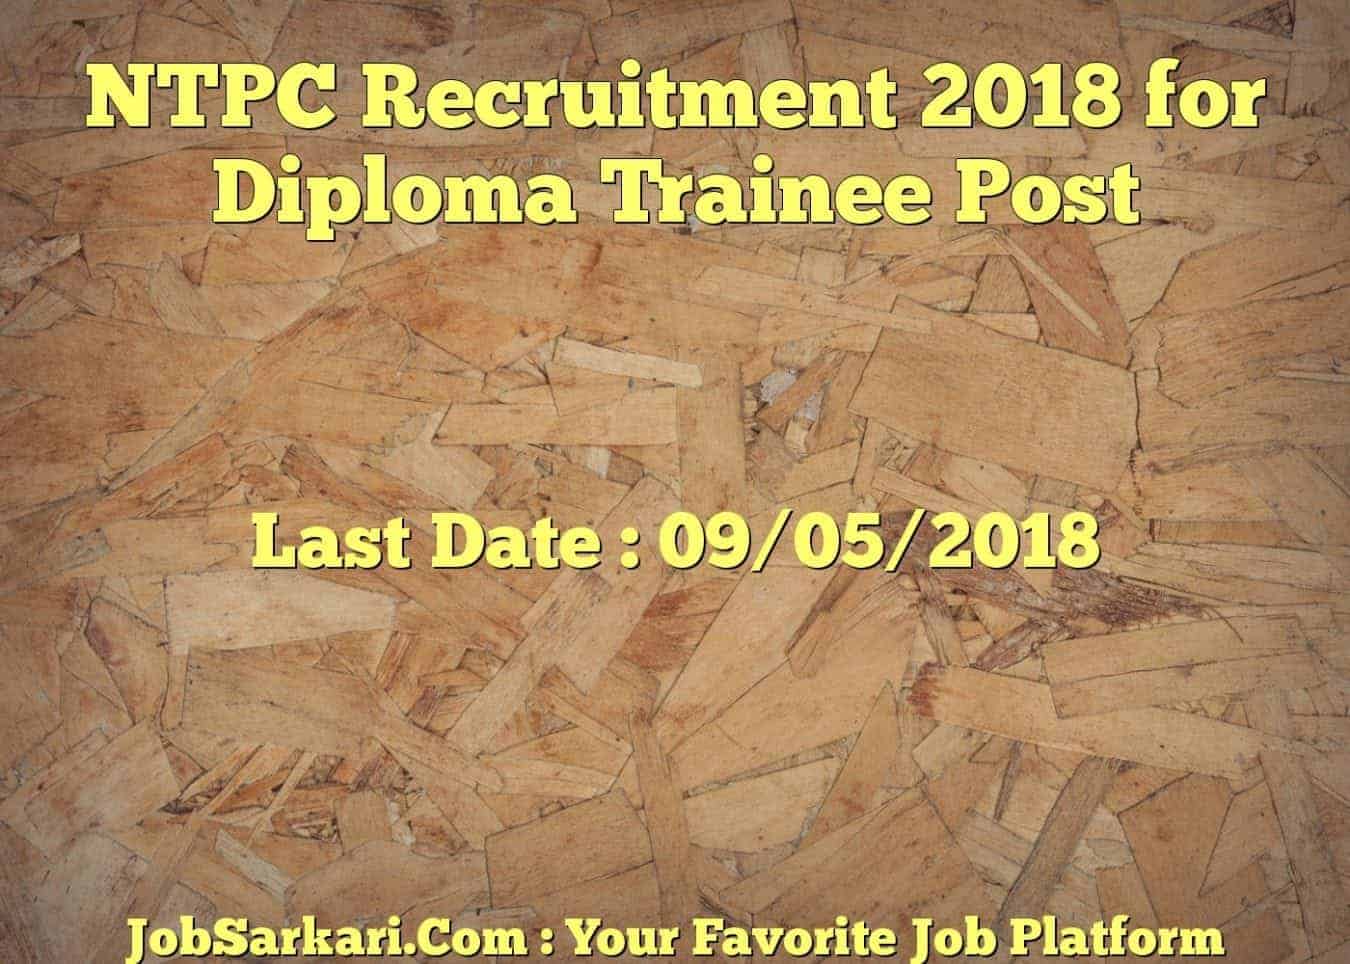 NTPC Recruitment 2018 for Diploma Trainee Post